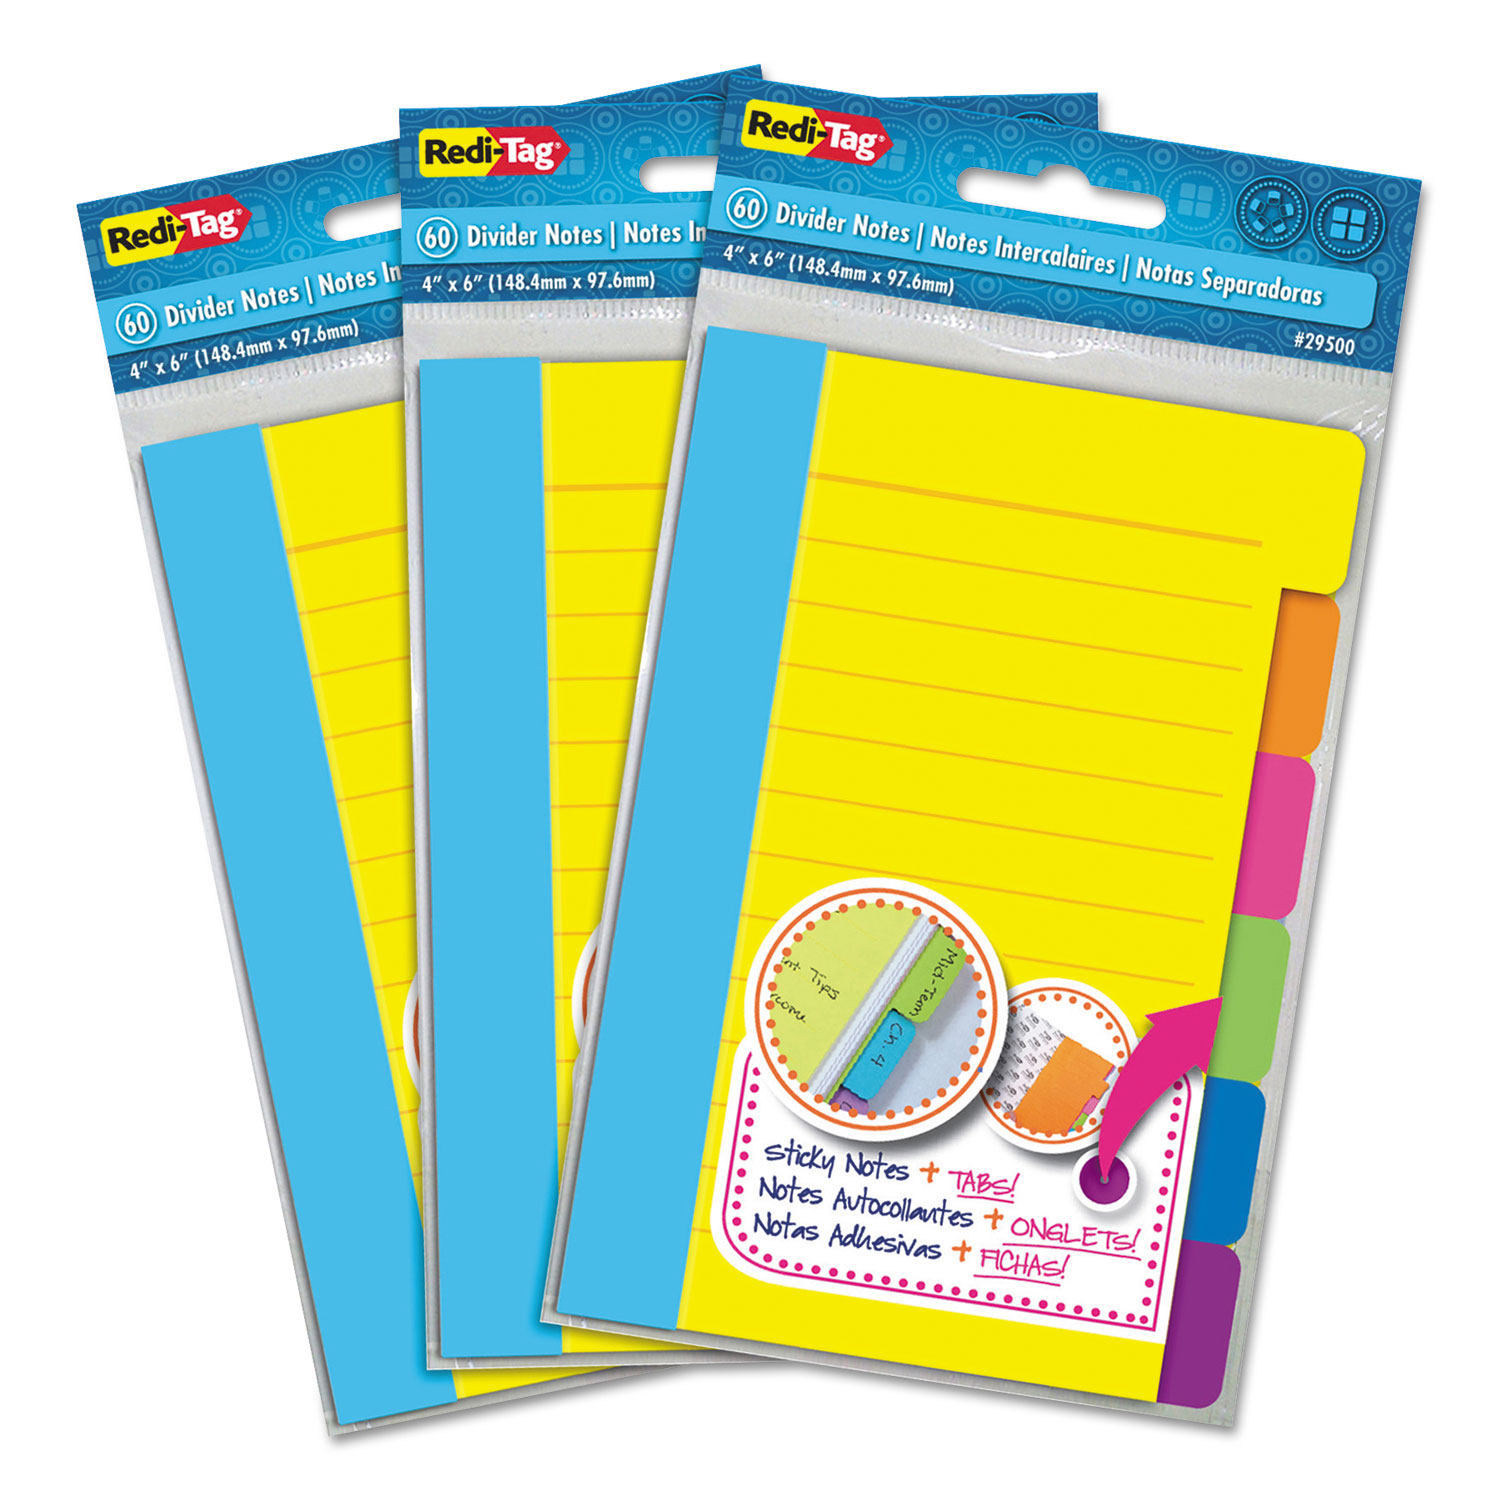  Redi-Tag 10245 Divider Sticky Notes with Tabs, Assorted Colors, 60 Sheets/Set, 3 Sets/Box (RTG10245) 